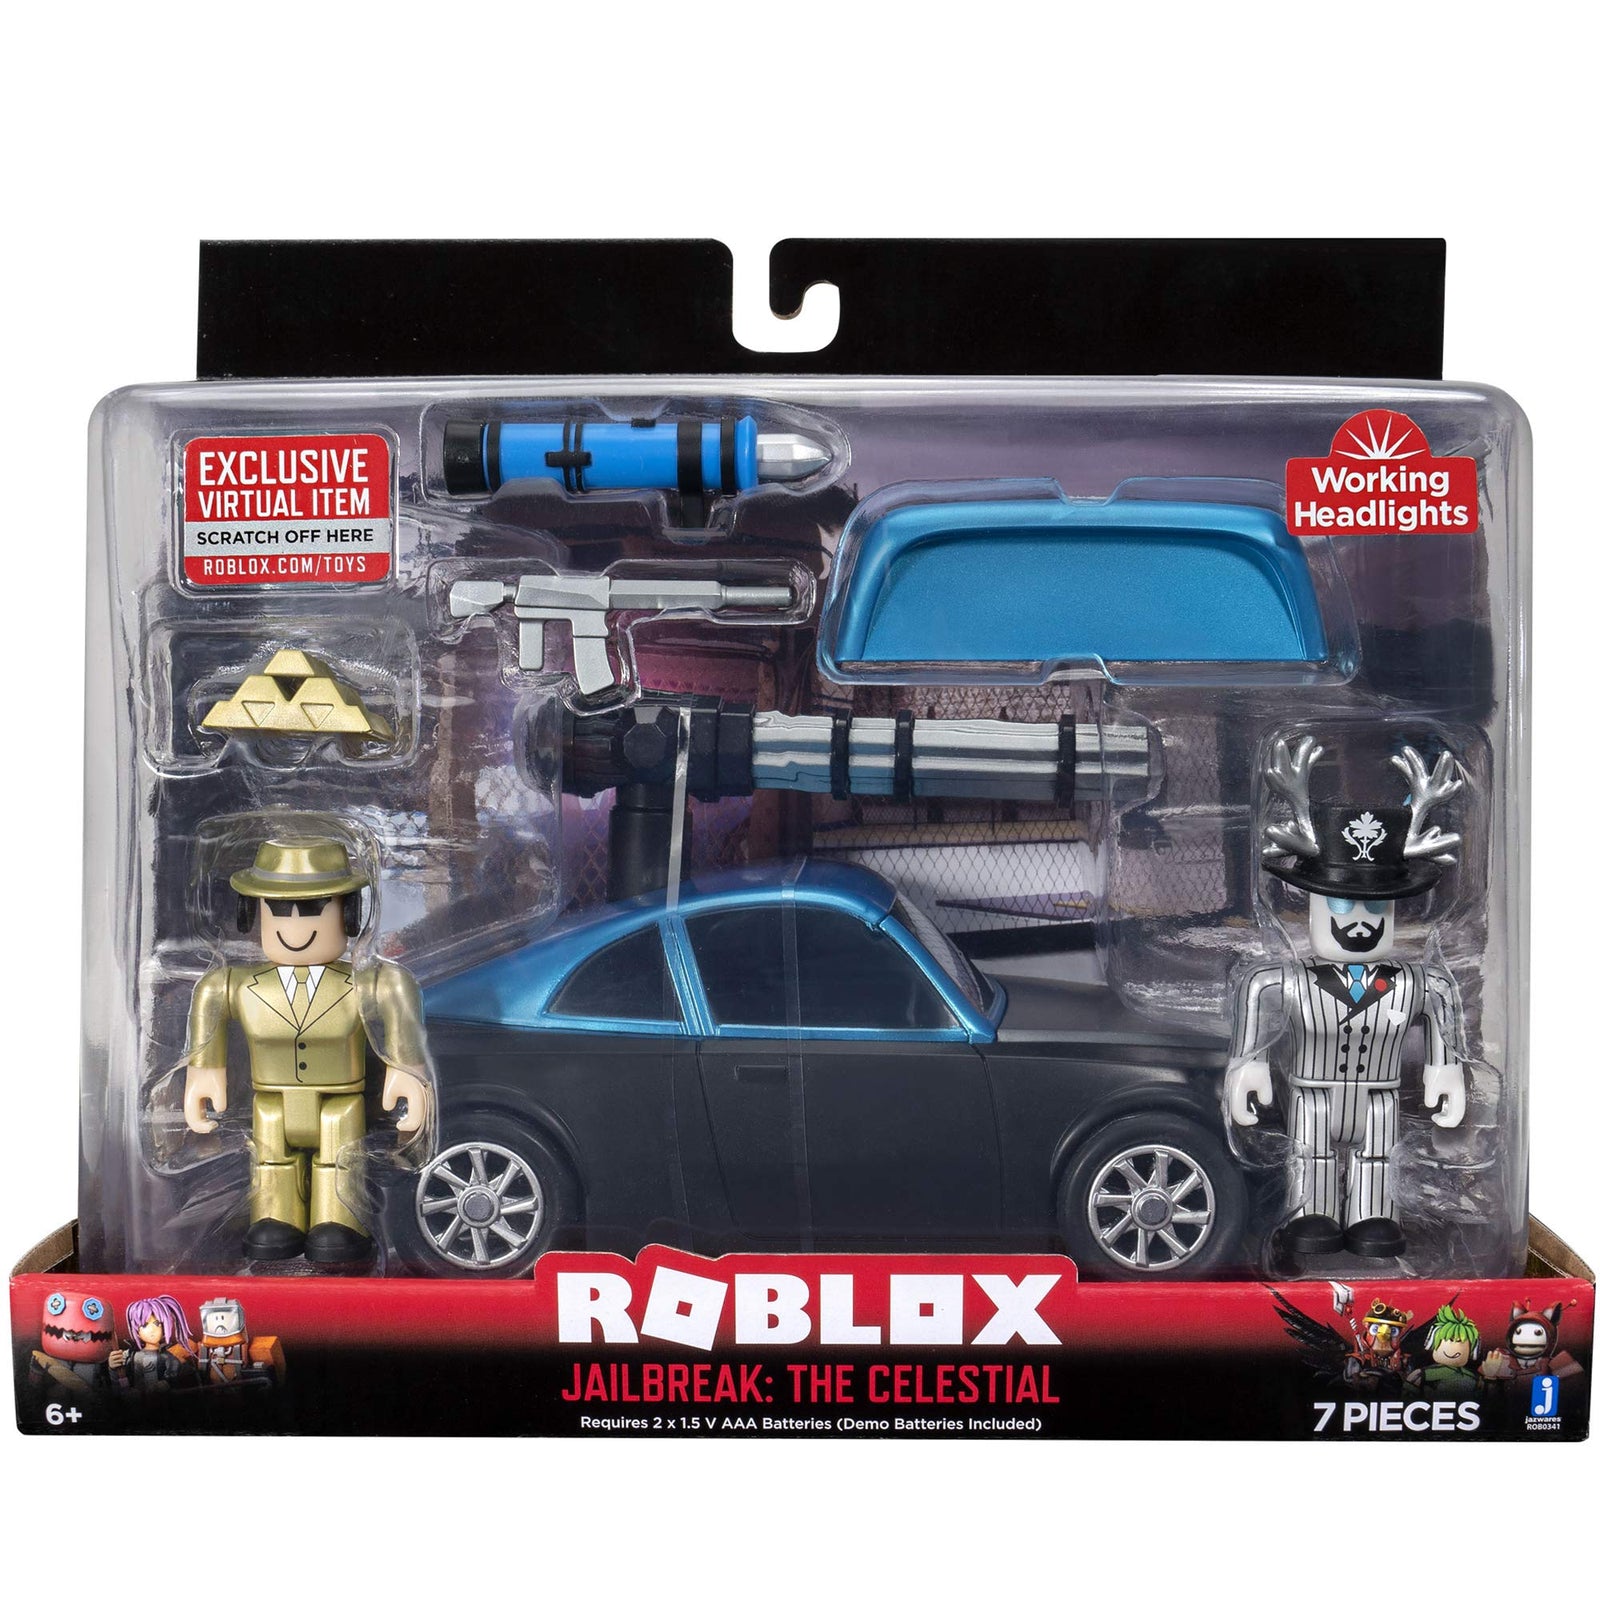 Roblox Action Collection - Jailbreak: The Celestial Deluxe Vehicle [Includes Exclusive Virtual Item]